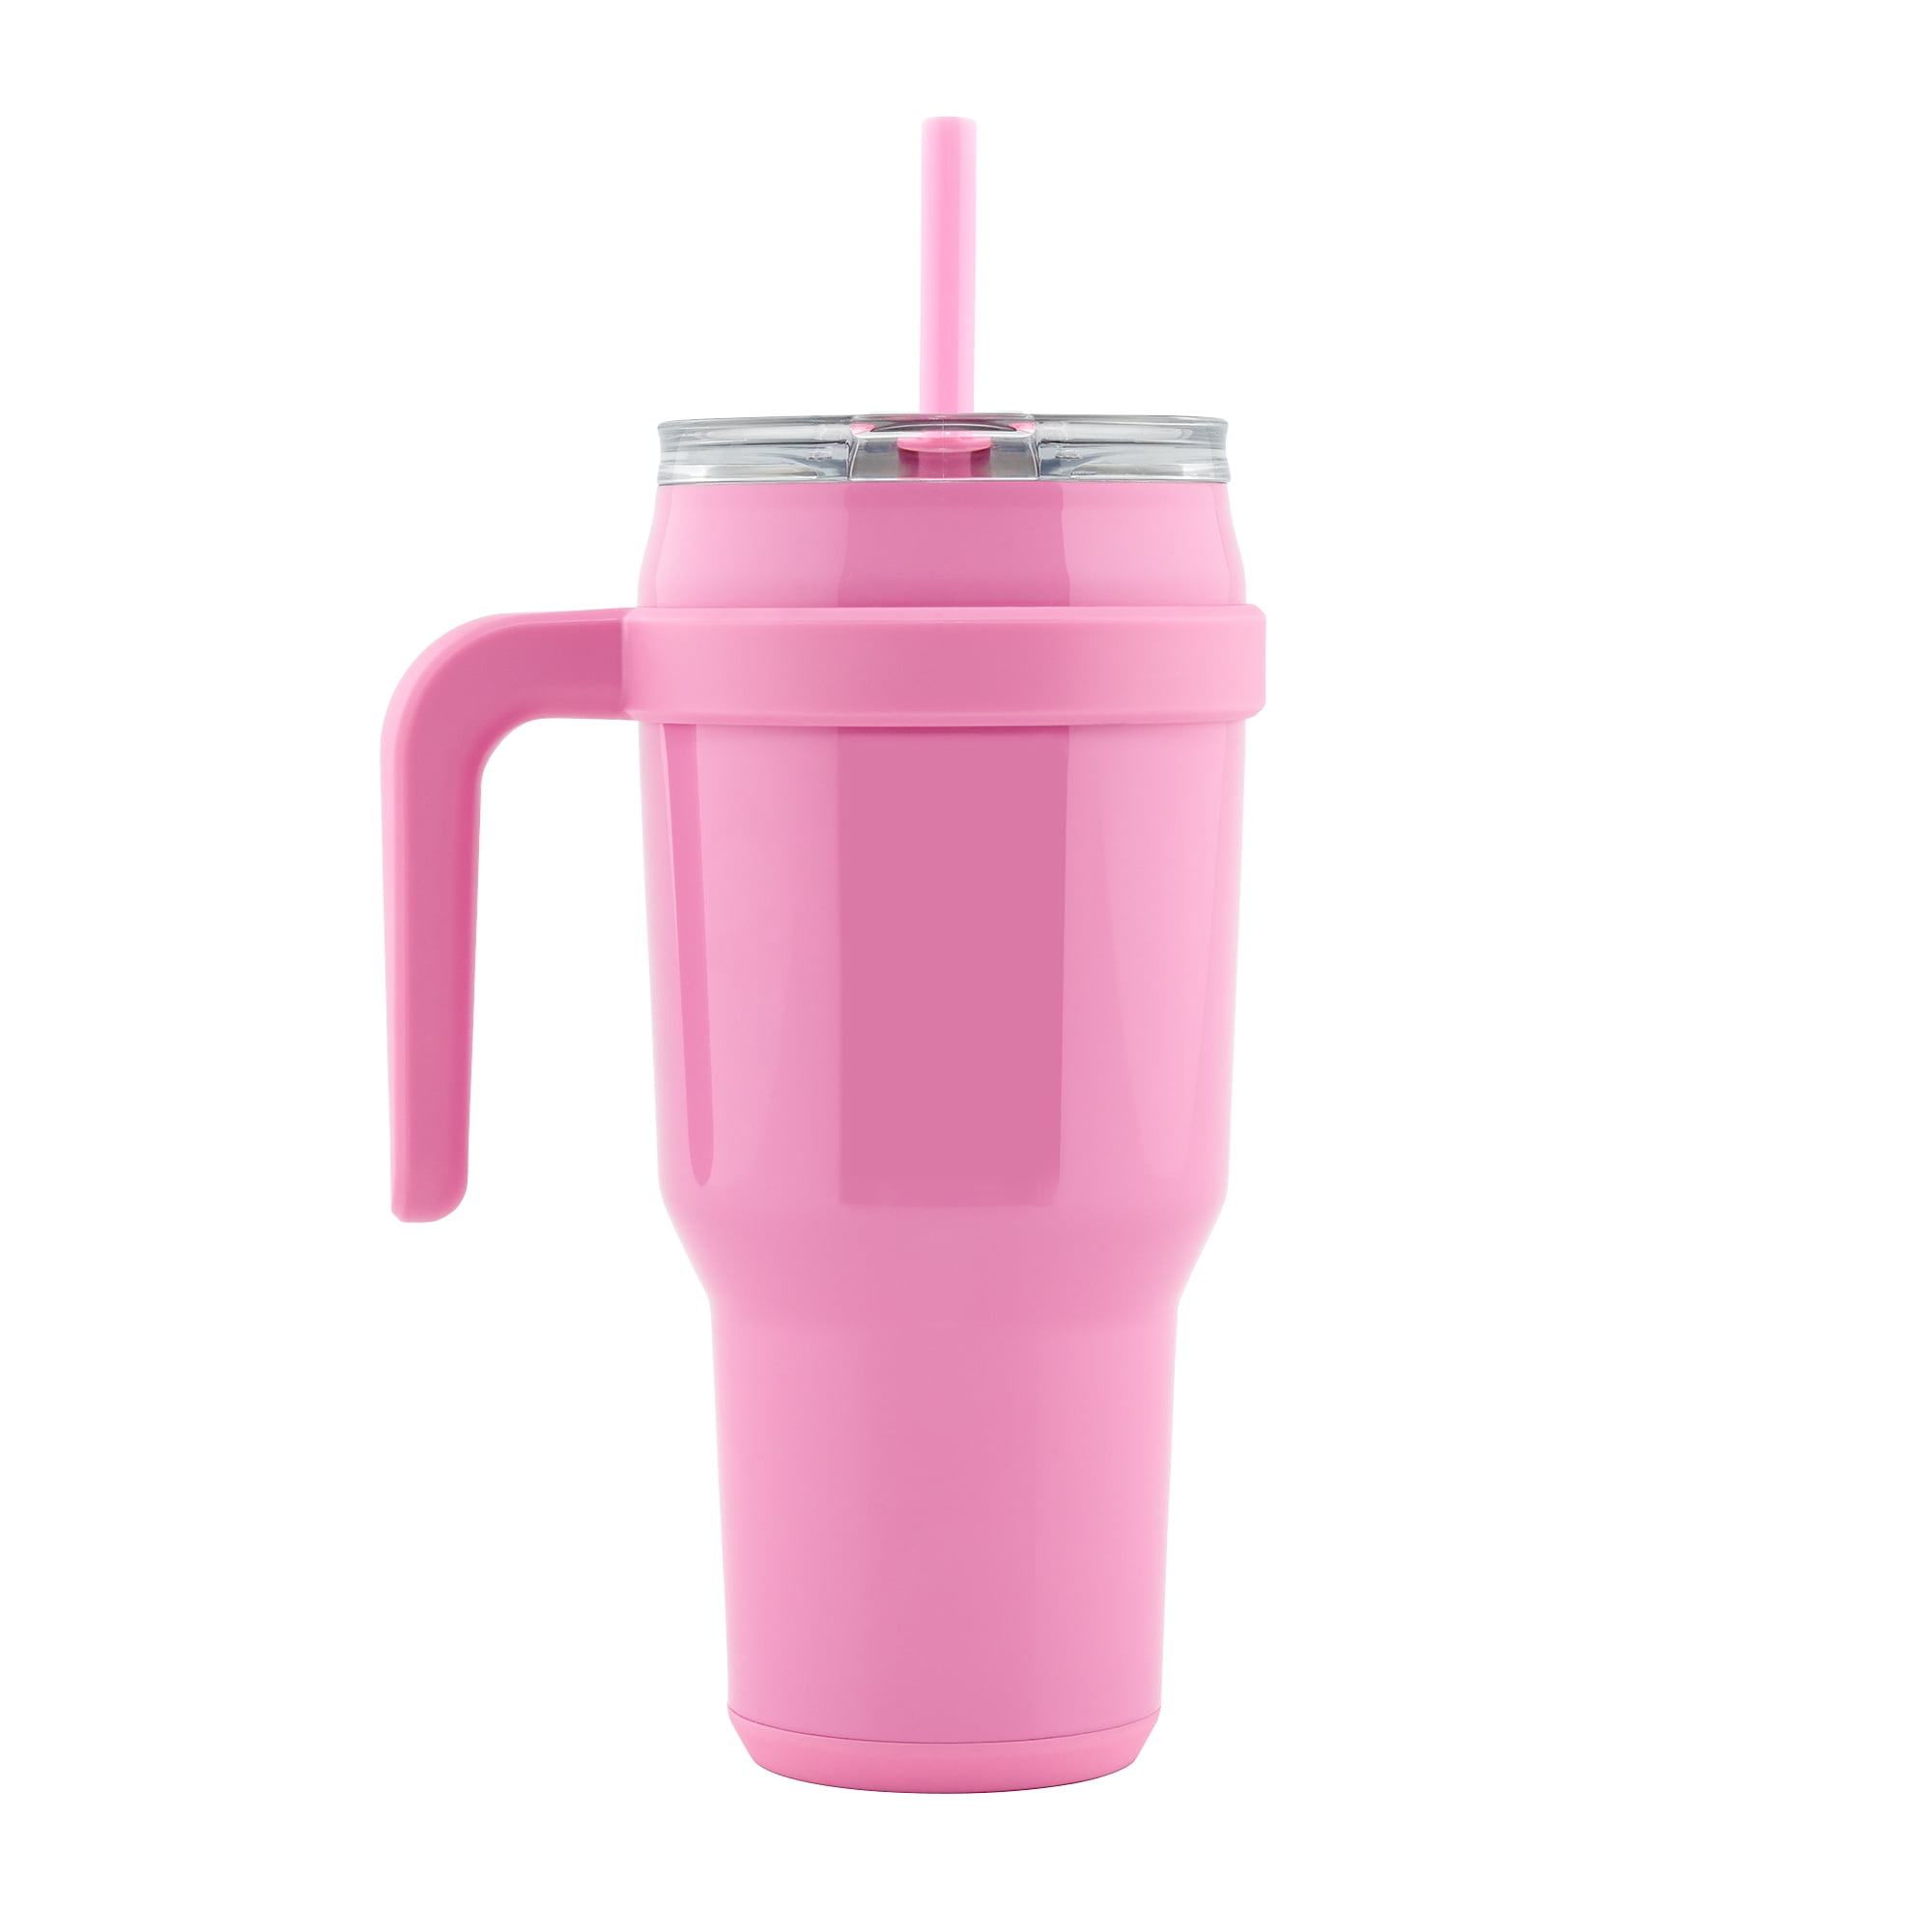 40oz Insulated Pink Mug Insulated Tumblers With Lids With Handle, Lid,  Straw, And Stainless Steel Construction Perfect For Coffee, Tea, Water,  Vacuum Insulation, Blue Orchid Designs Ready To Ship From Bestdeals, $7.9